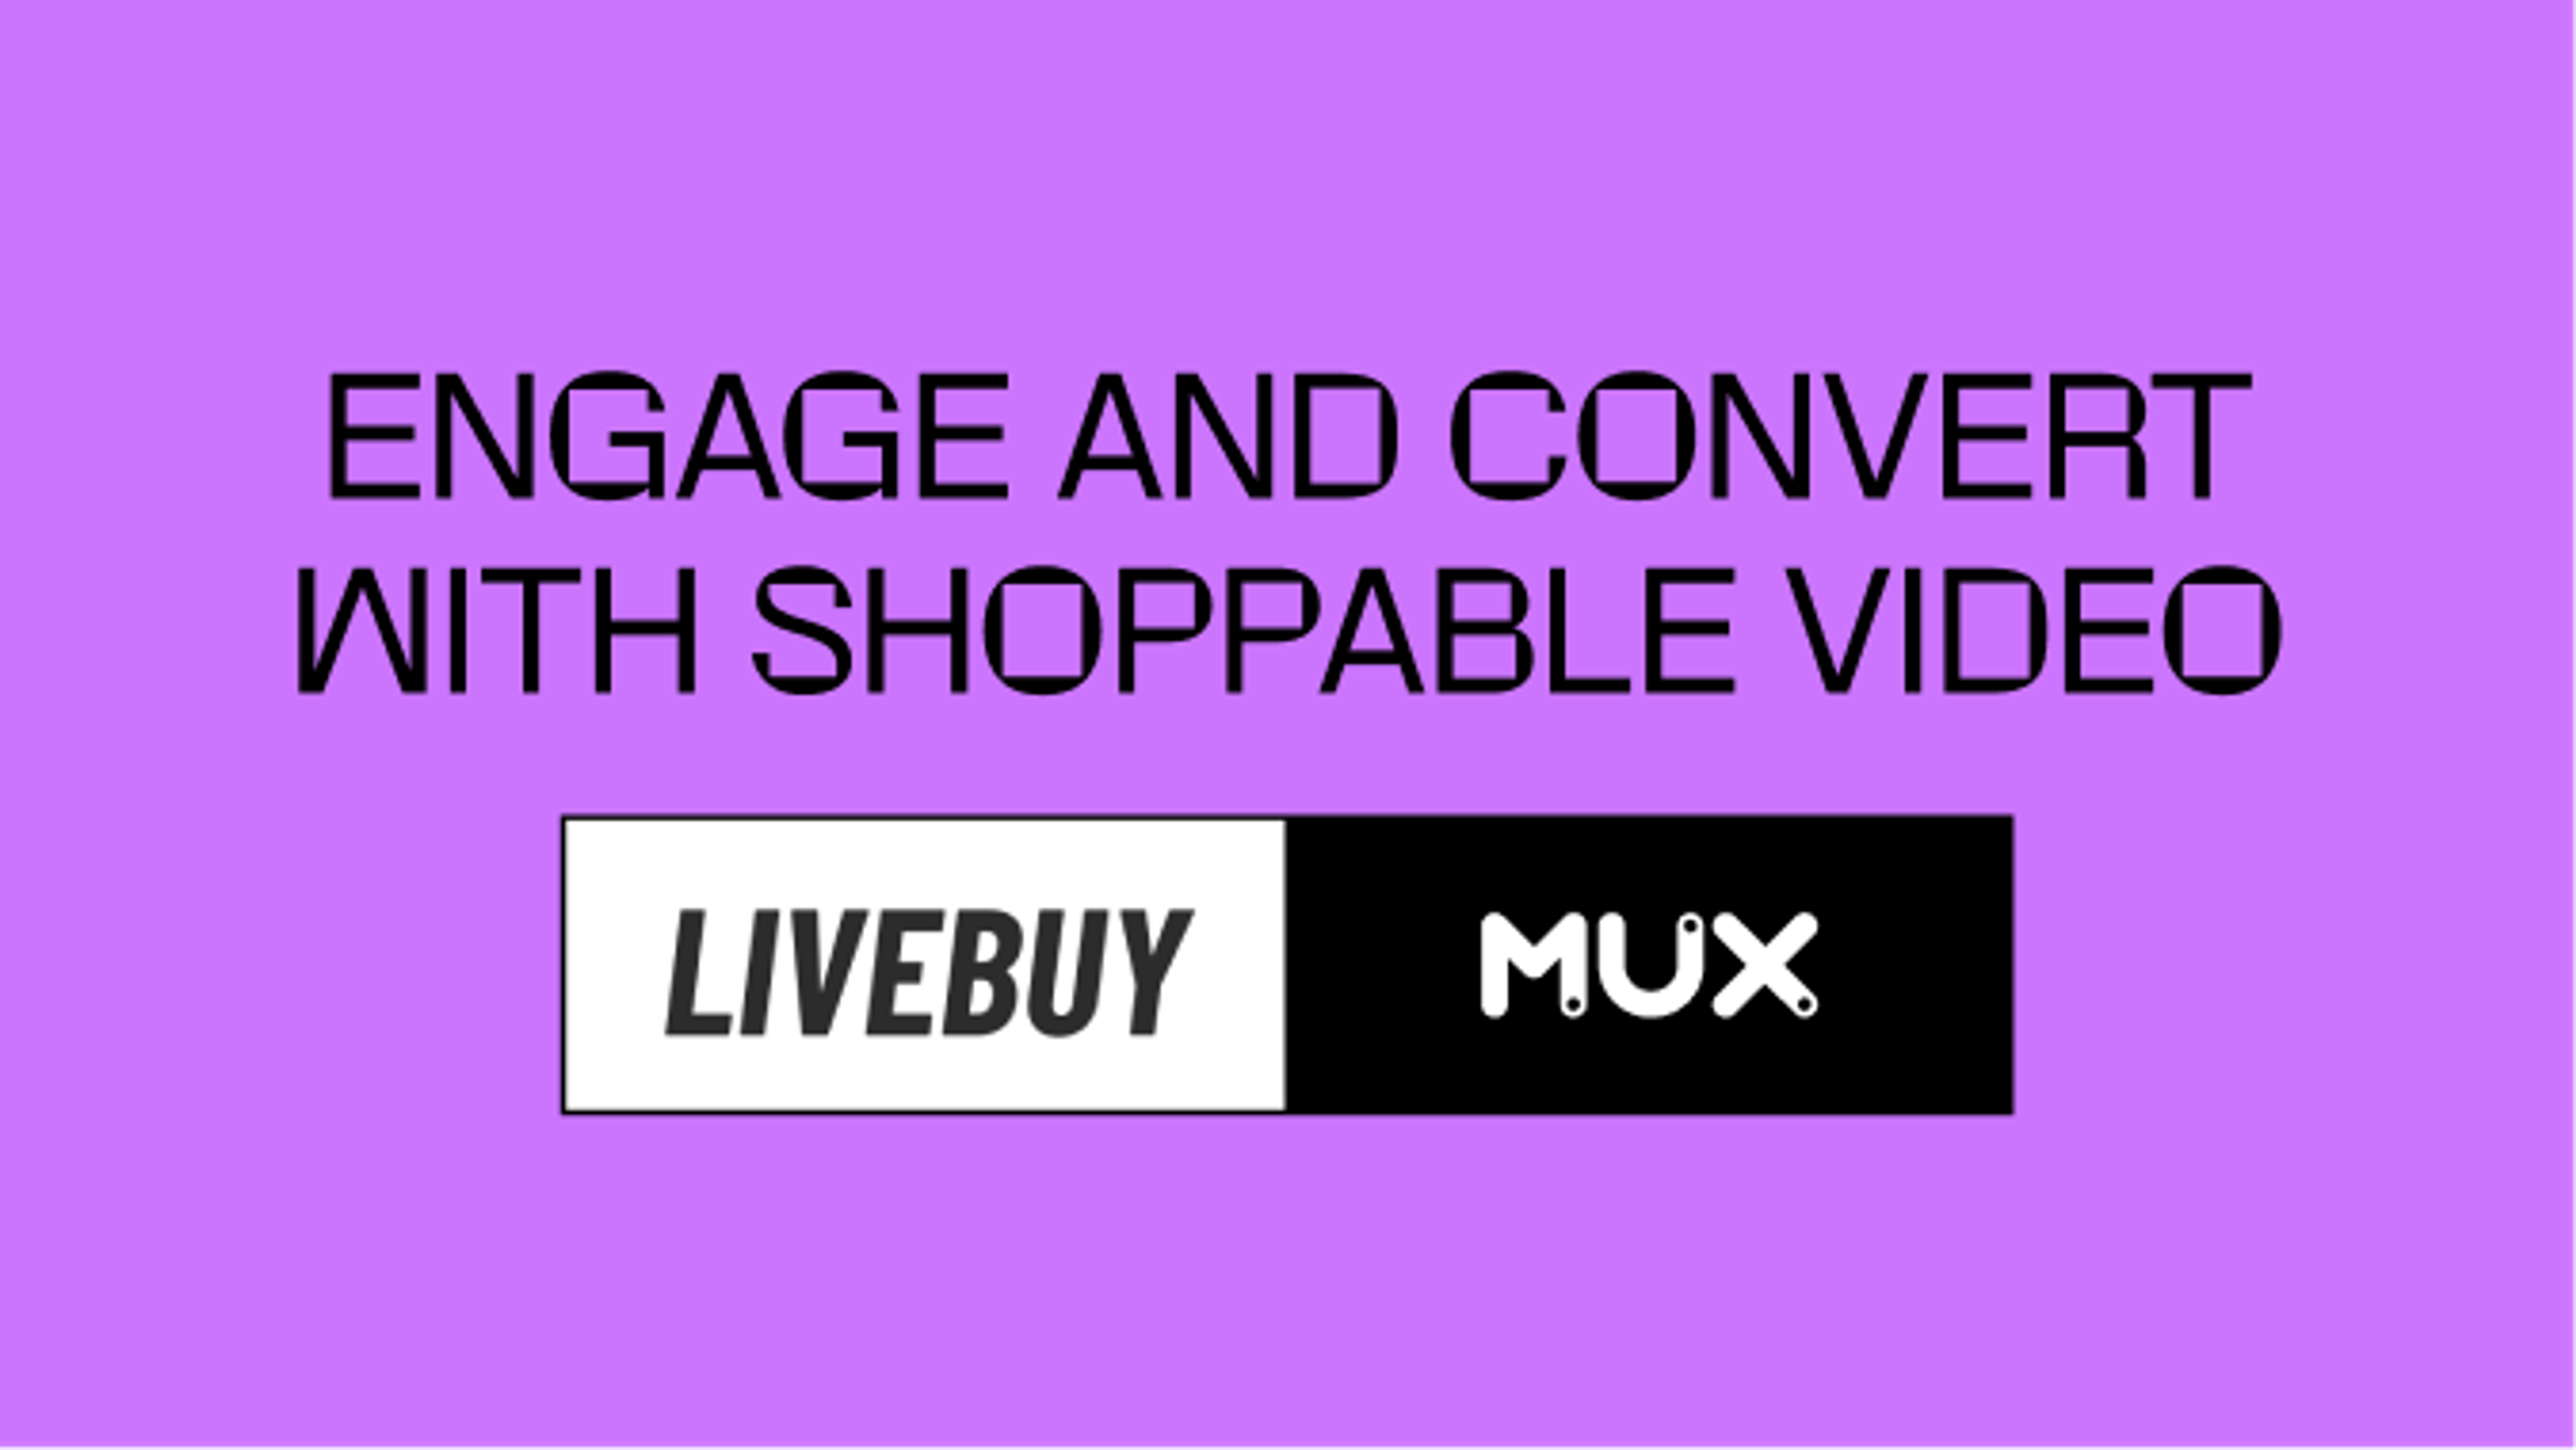 An title card combining the lively and mux logos